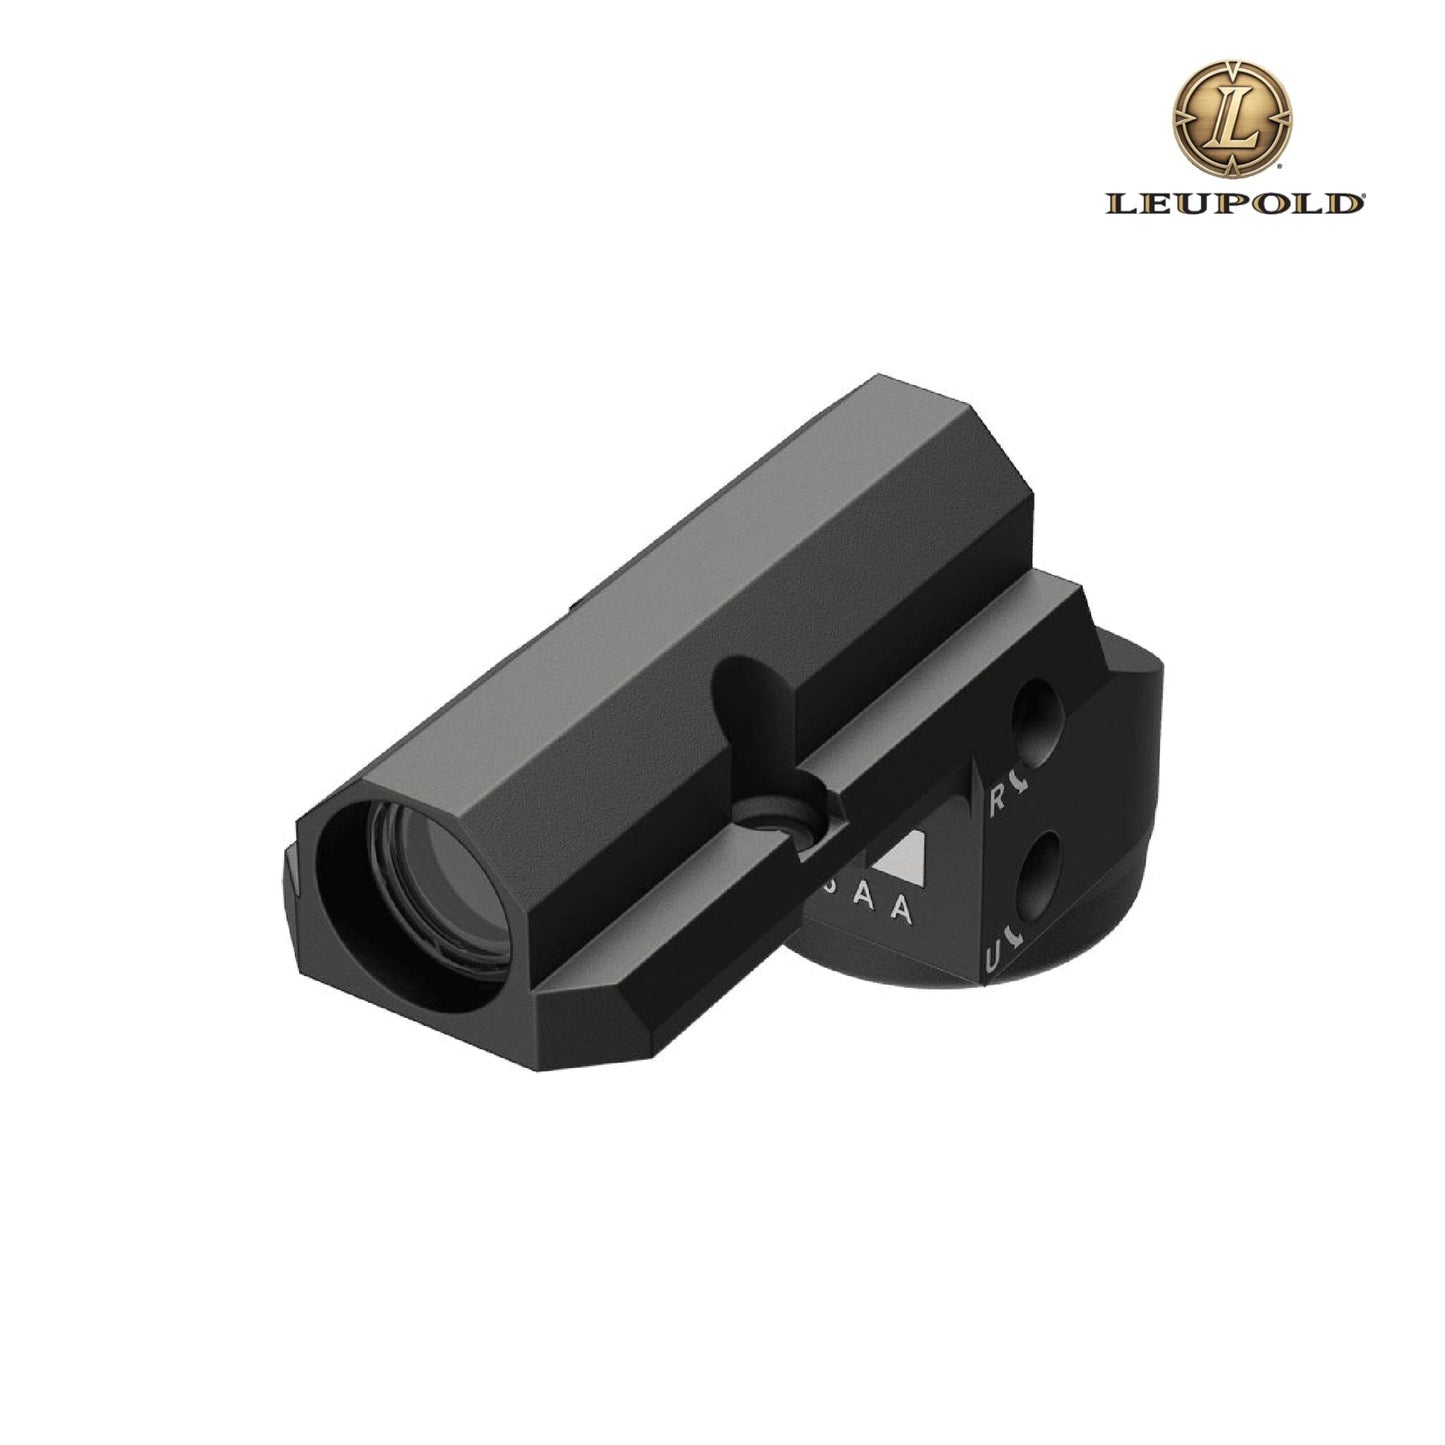 Leupold DeltaPoint Micro Red Dot Sight - Glock - 178745 Red Dot Sight Leupold 